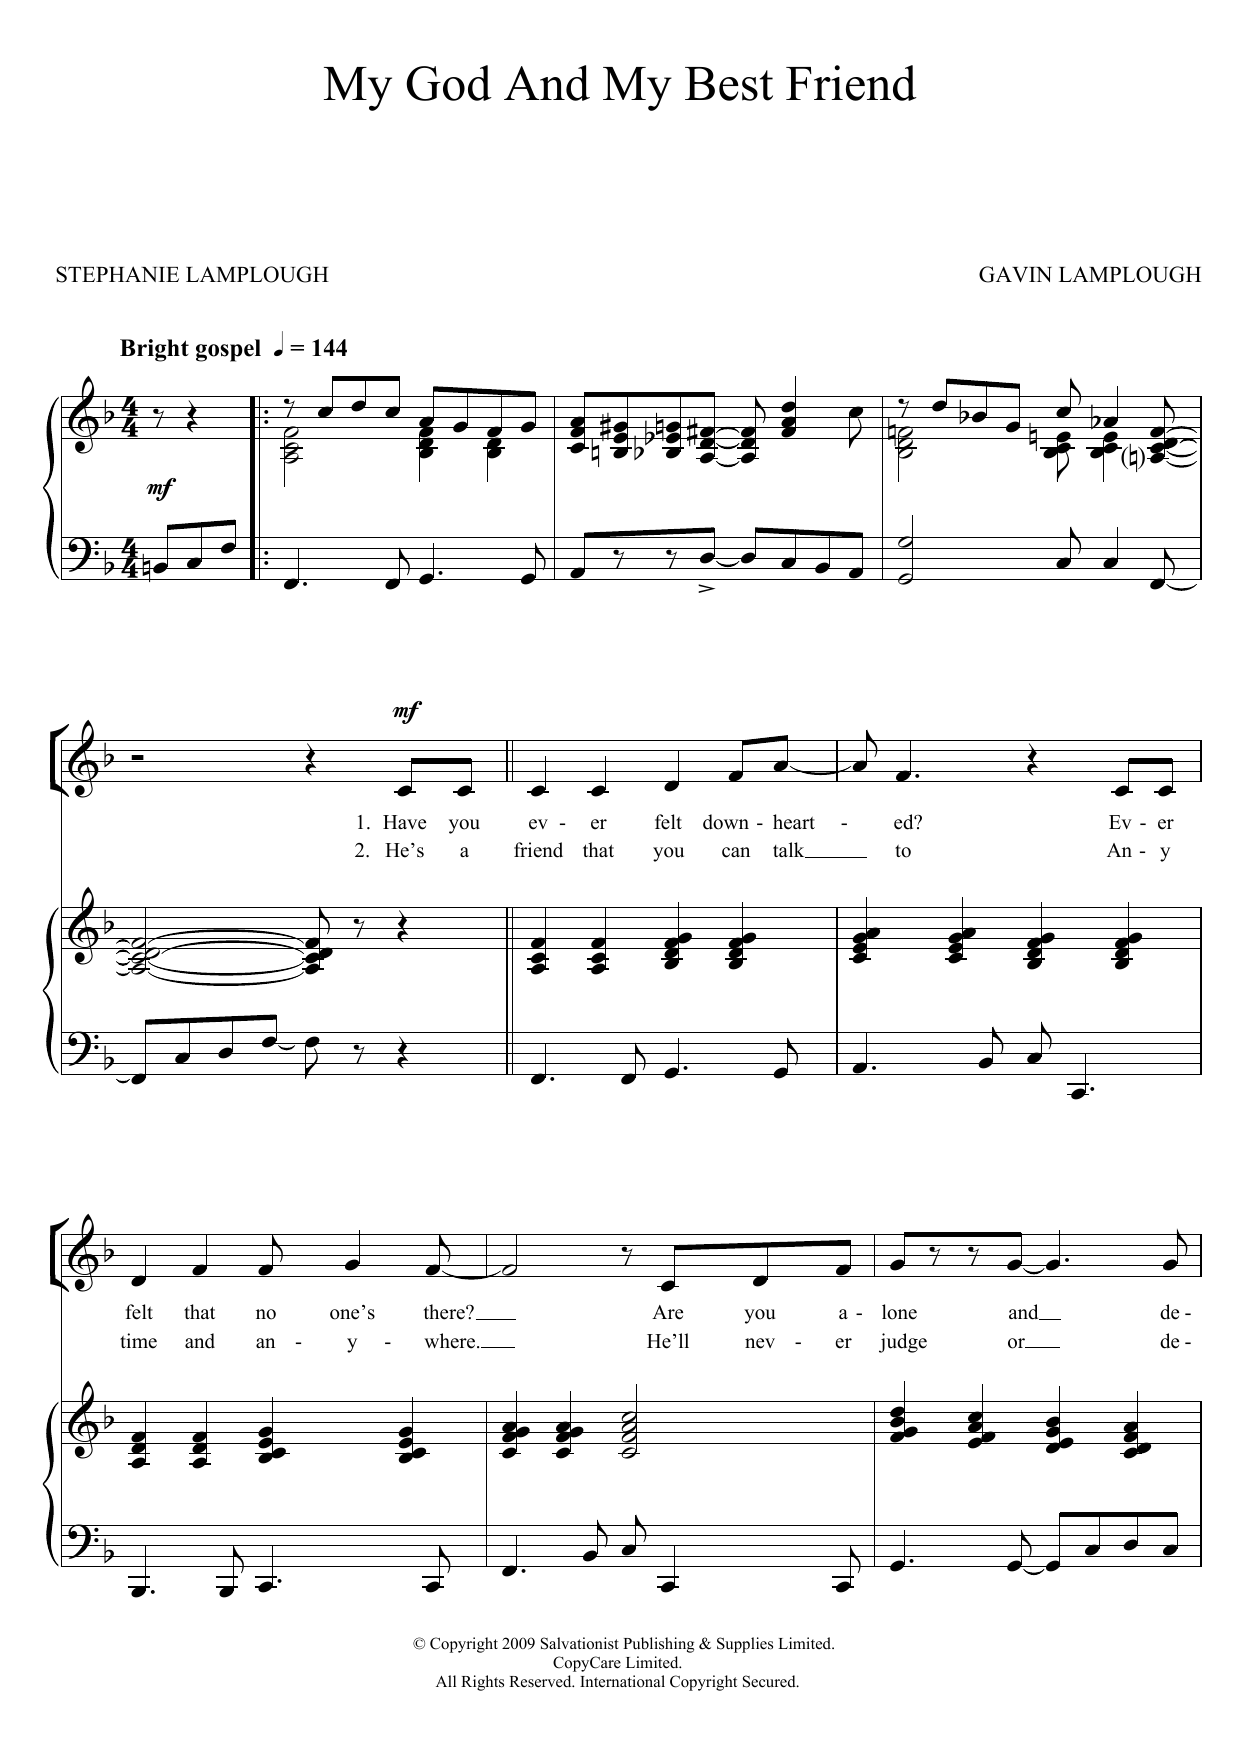 Download The Salvation Army My God And My Best Friend Sheet Music